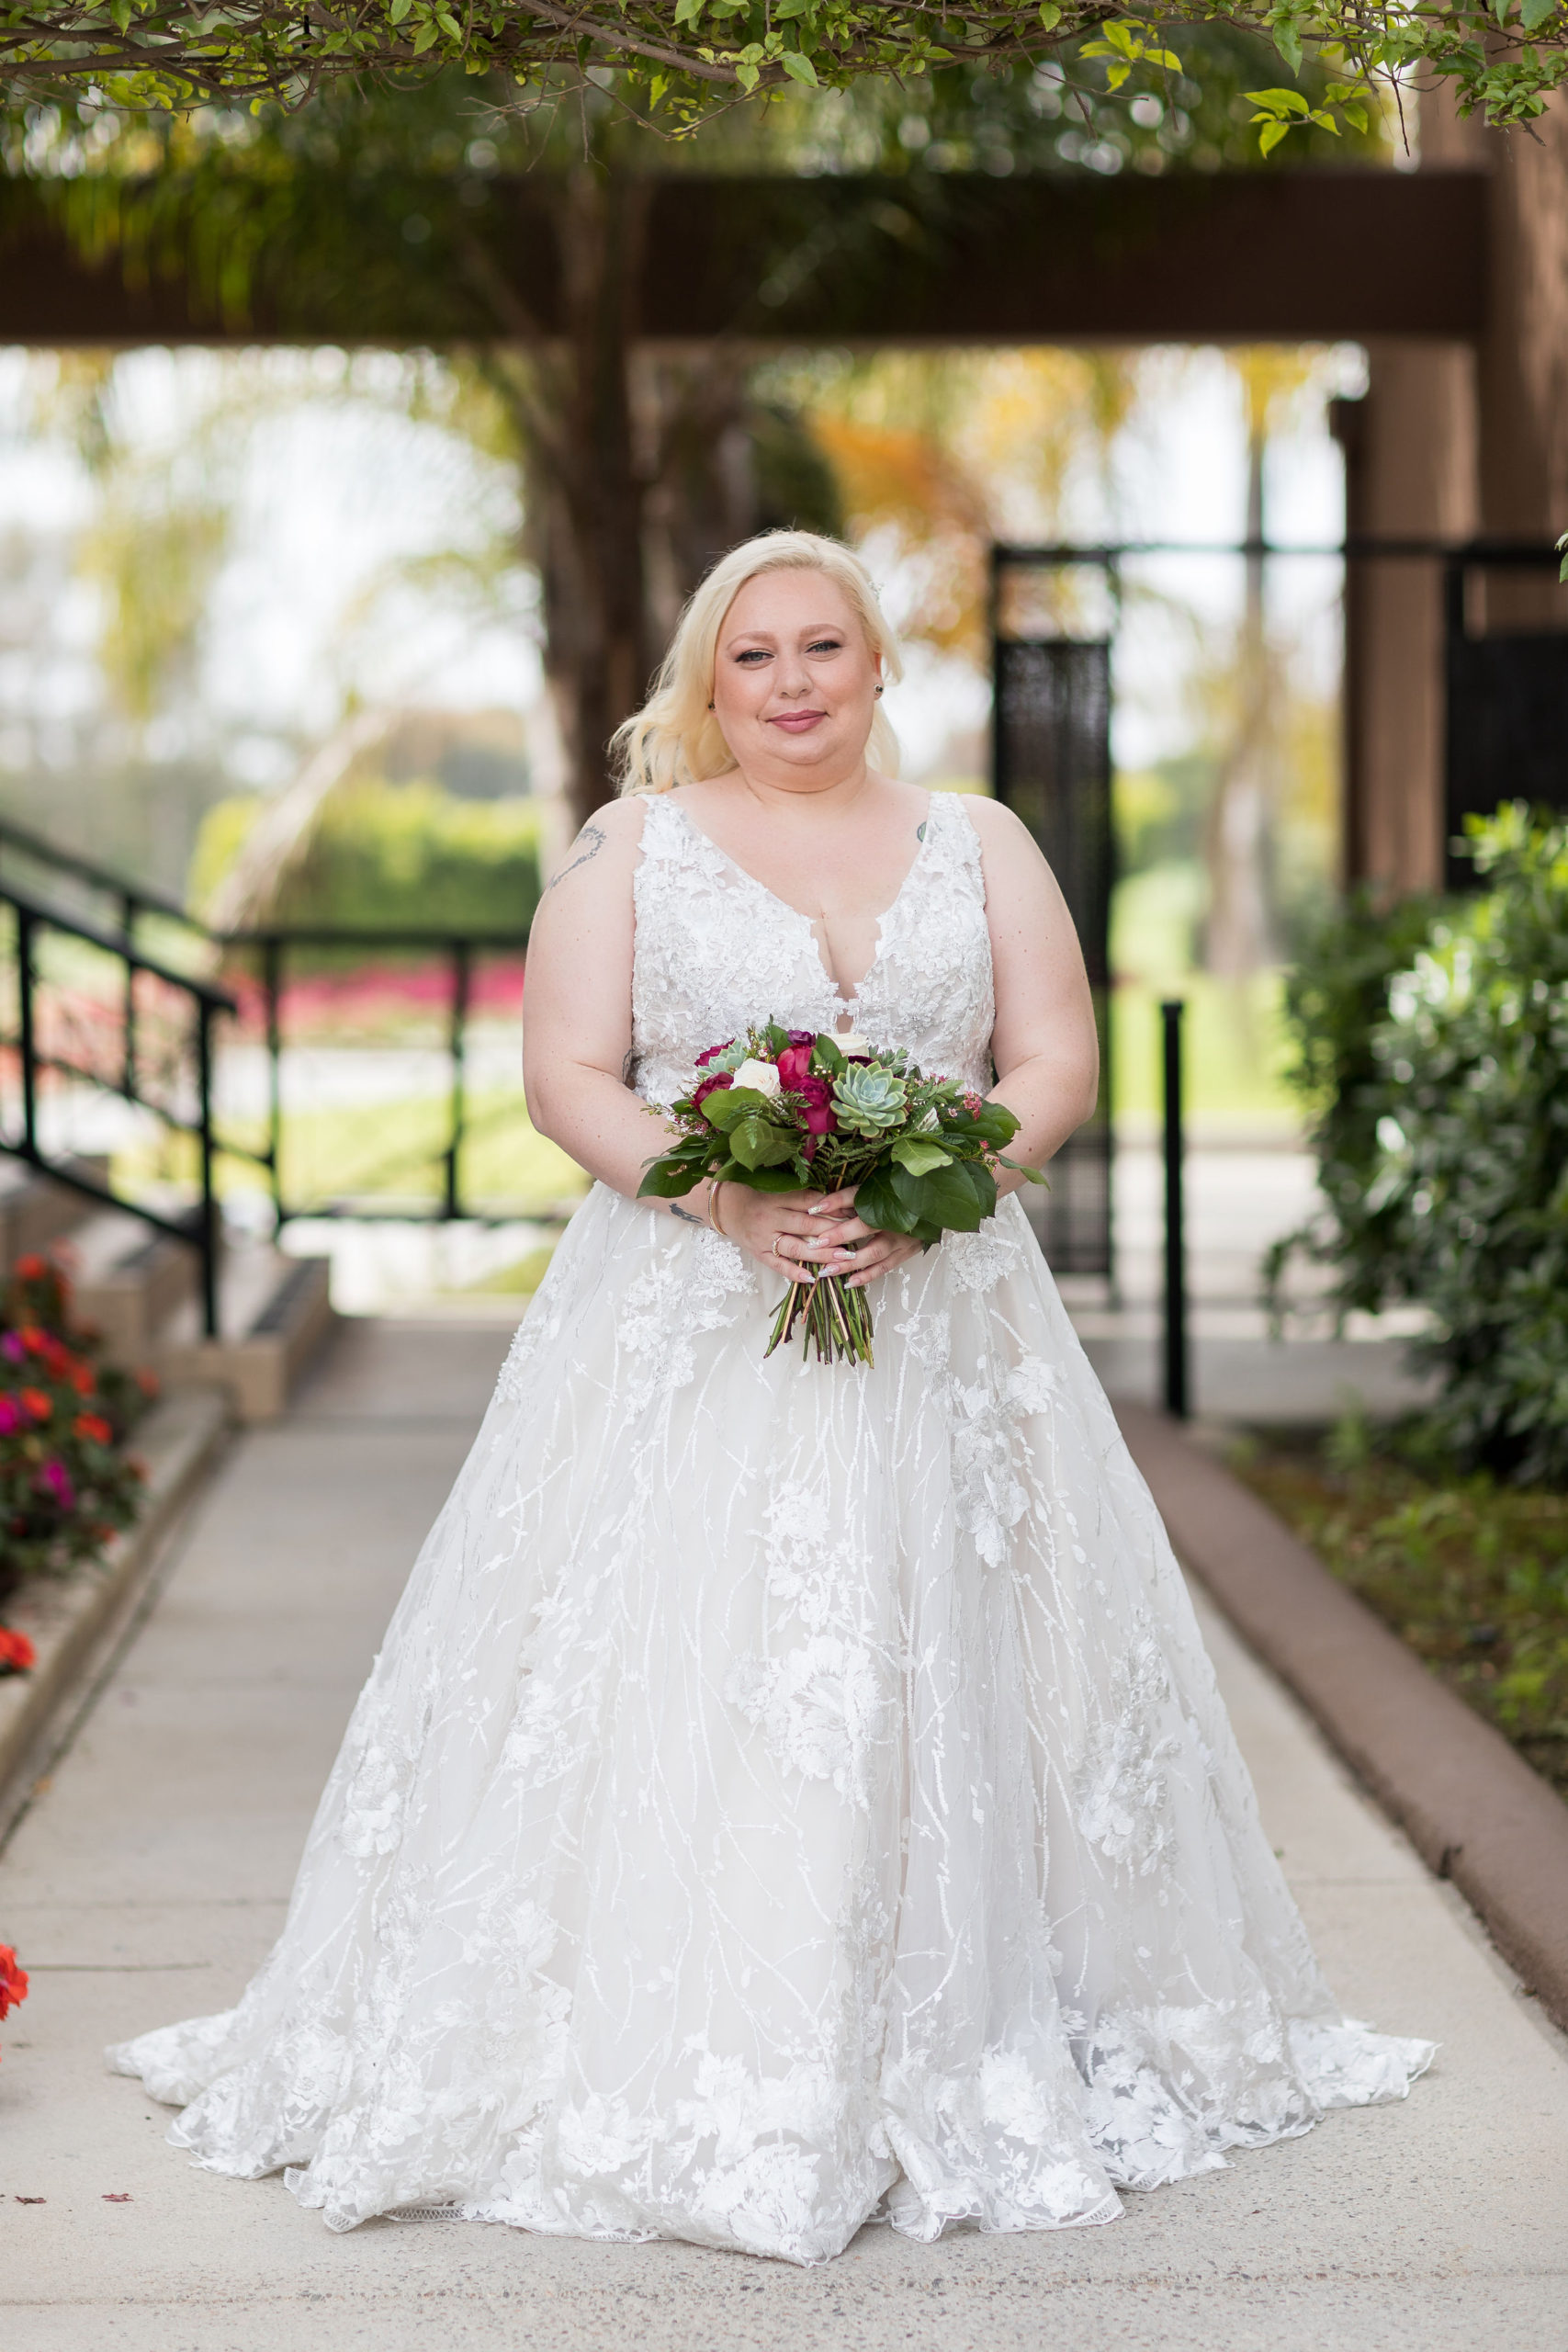 Shannon’s Ornate Wedding Gown